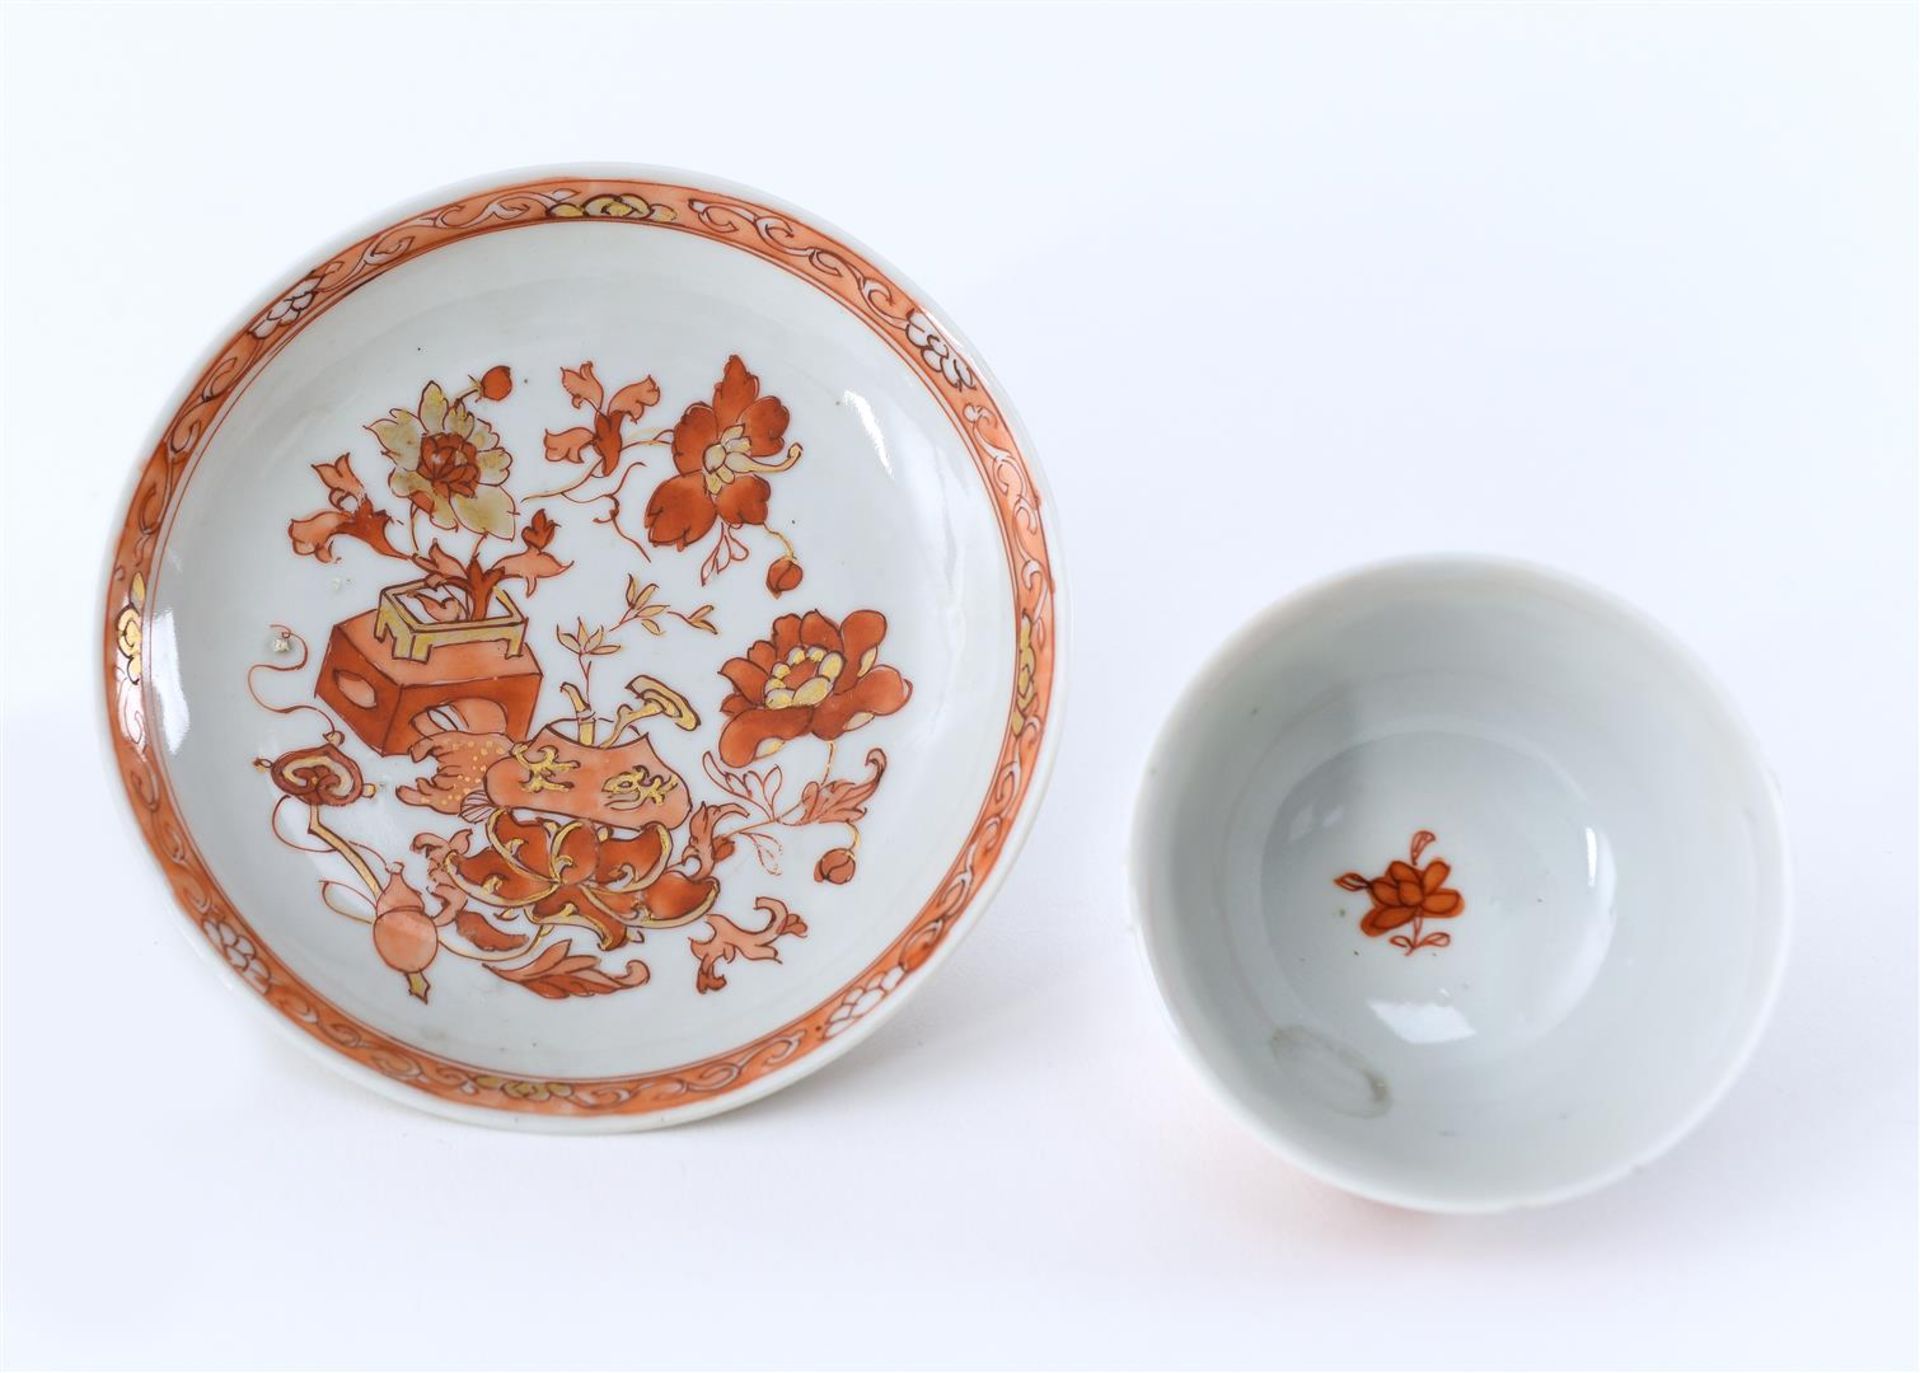 A set of four red and white porcelain cups with saucers, decorated with flower vases. Unmarked. - Image 4 of 5